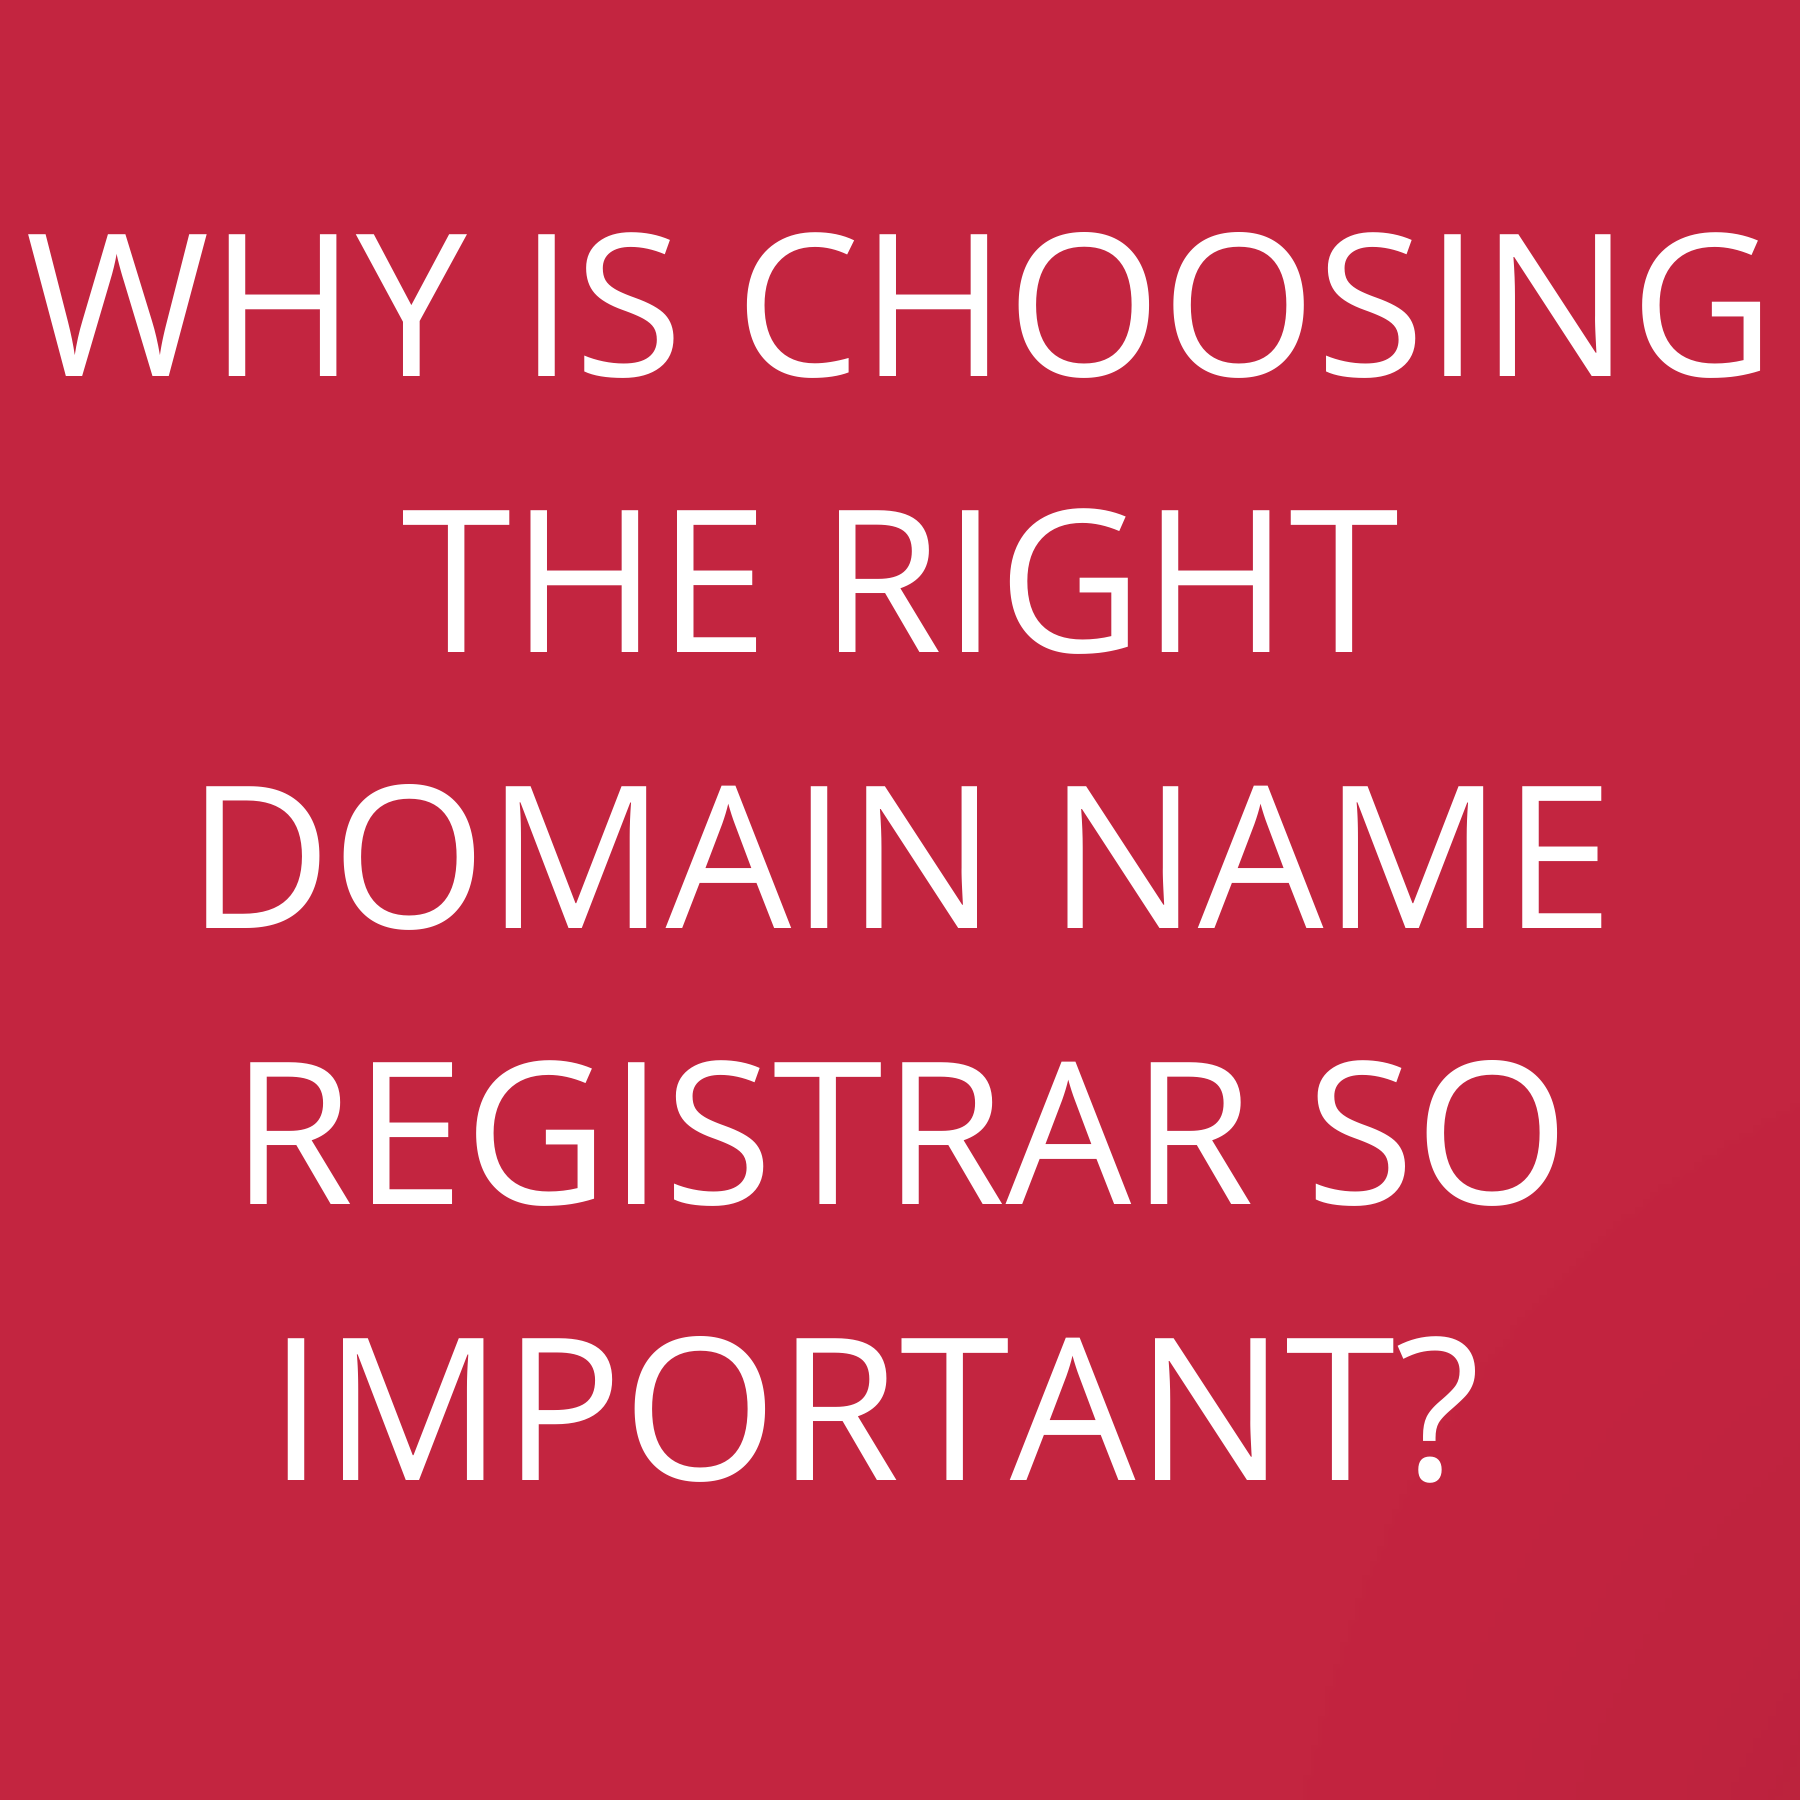 Why is choosing the right domain name registrar so important?